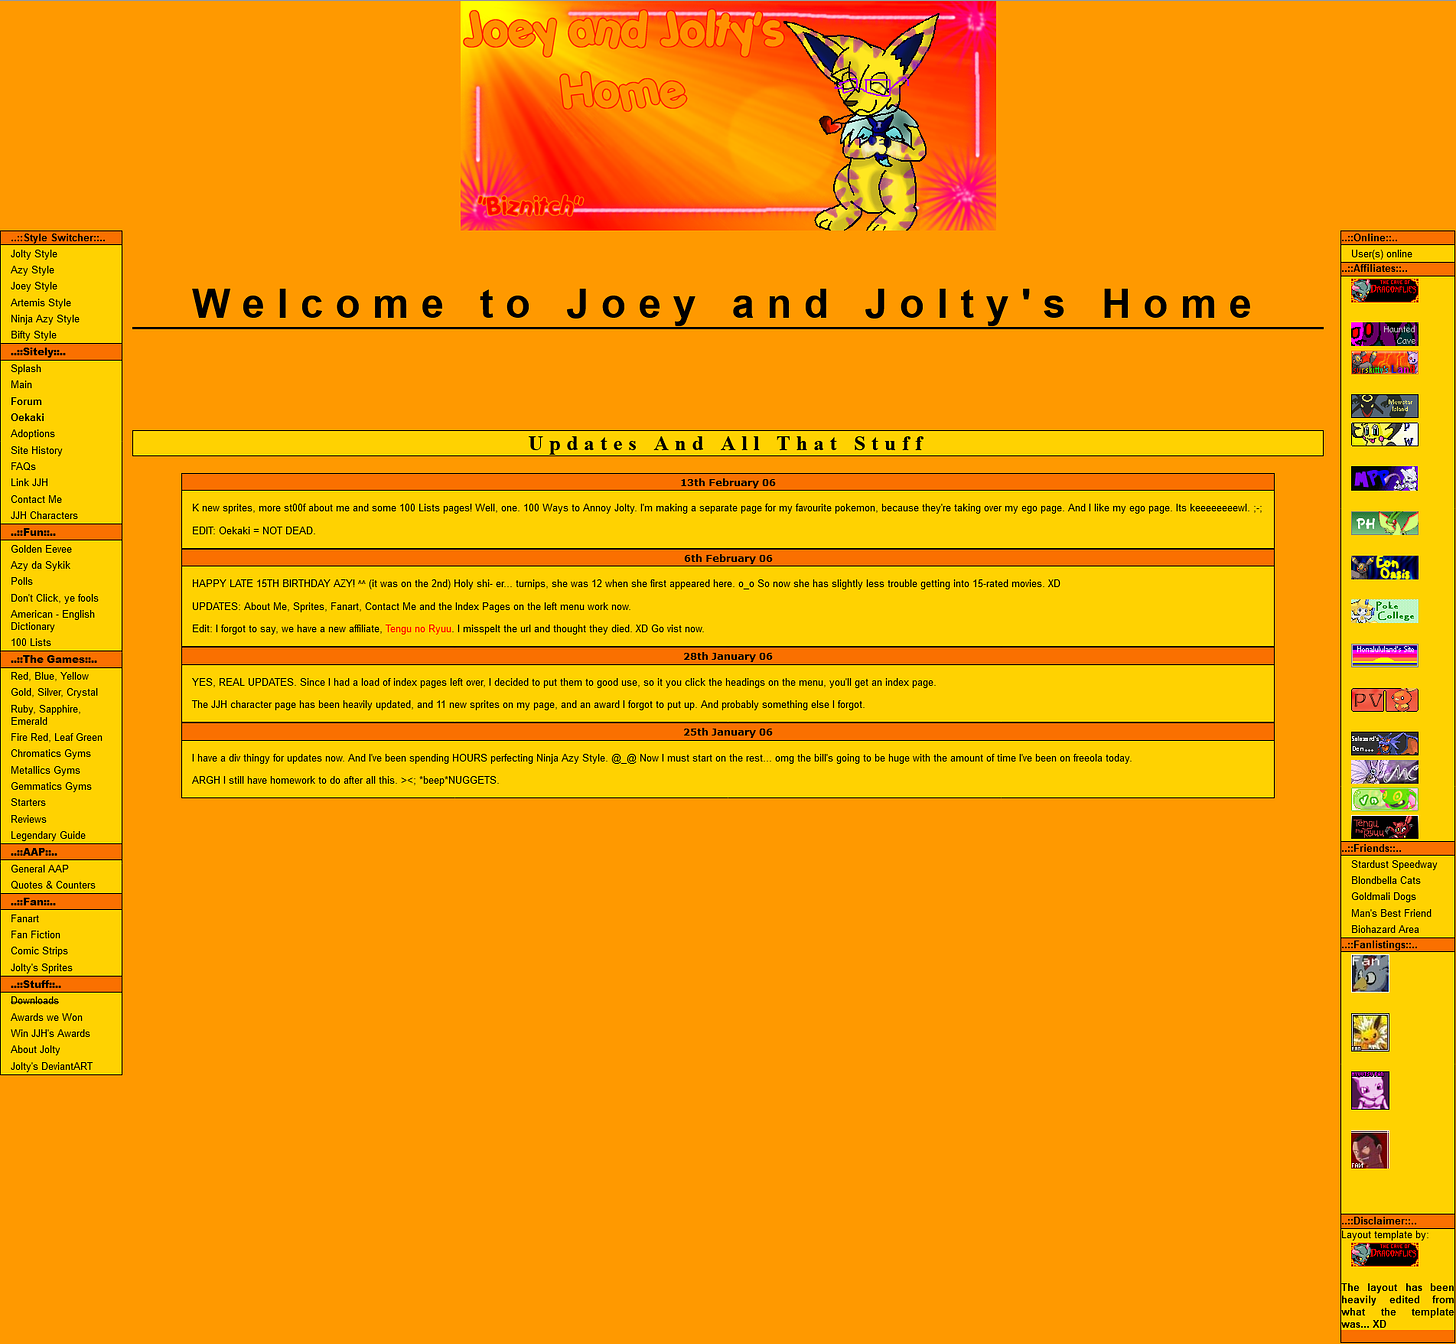 Joey & Jolty's Home website layout from February 2006